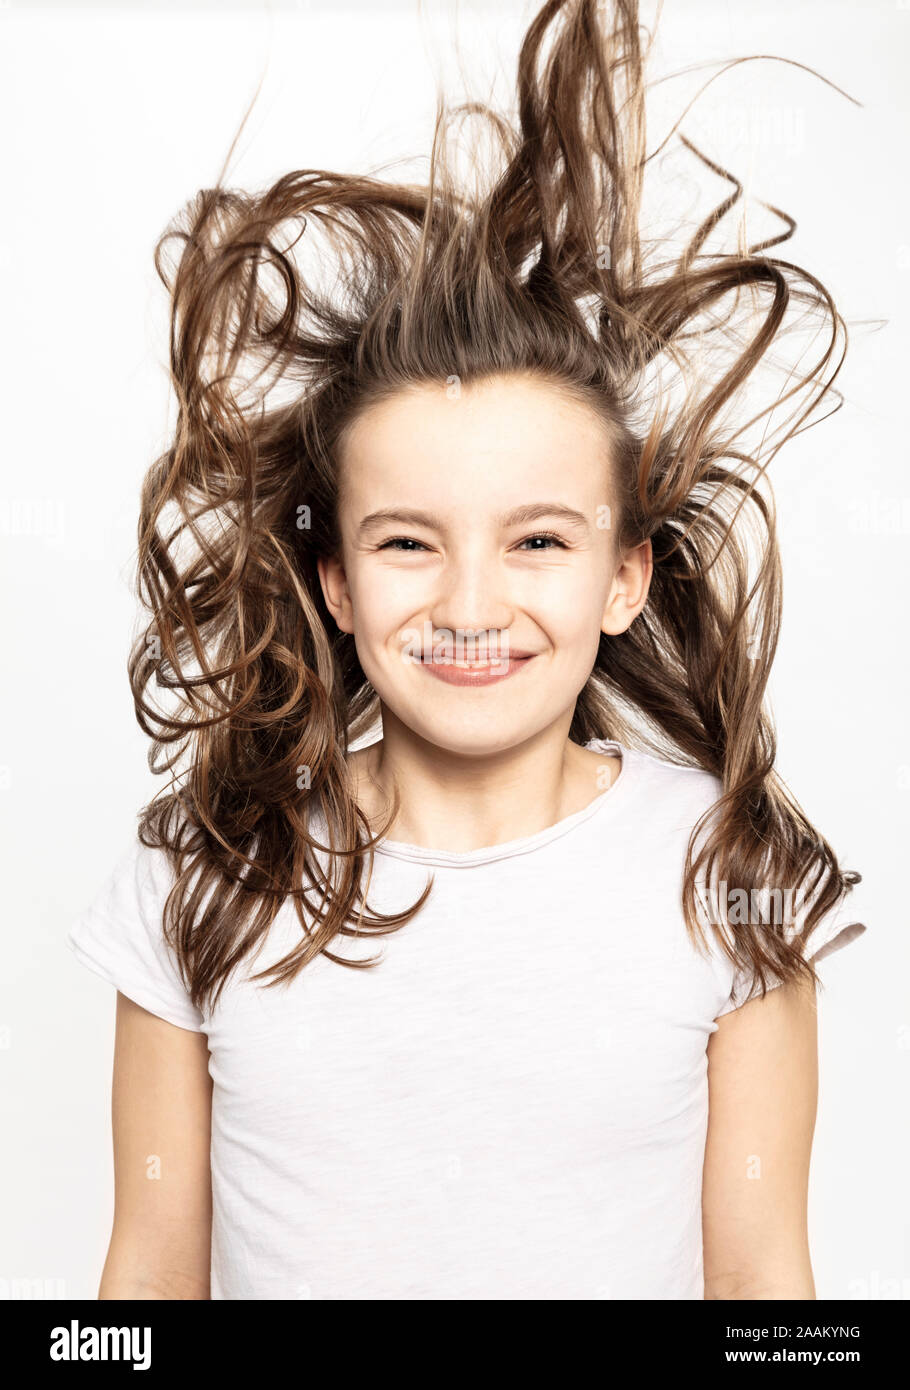 Happy girl with flying hair, white background Stock Photo